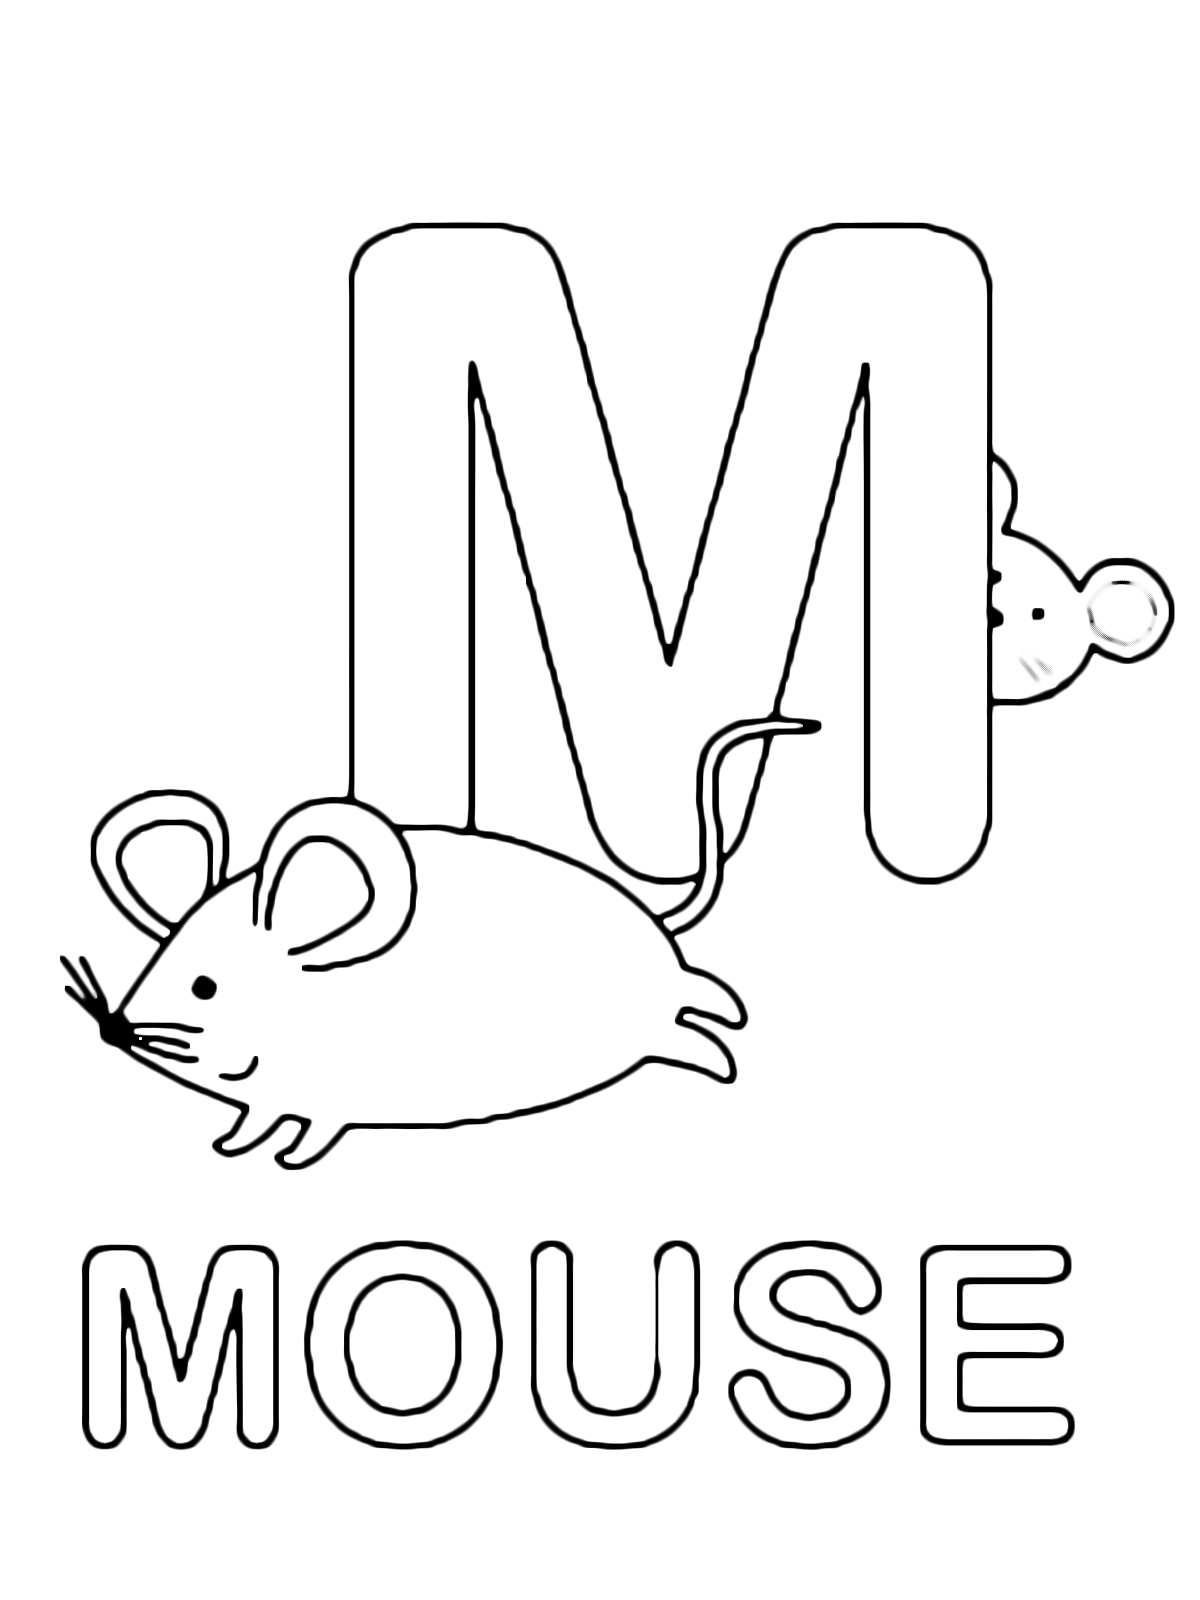 Letters and numbers - M for mouse uppercase letter